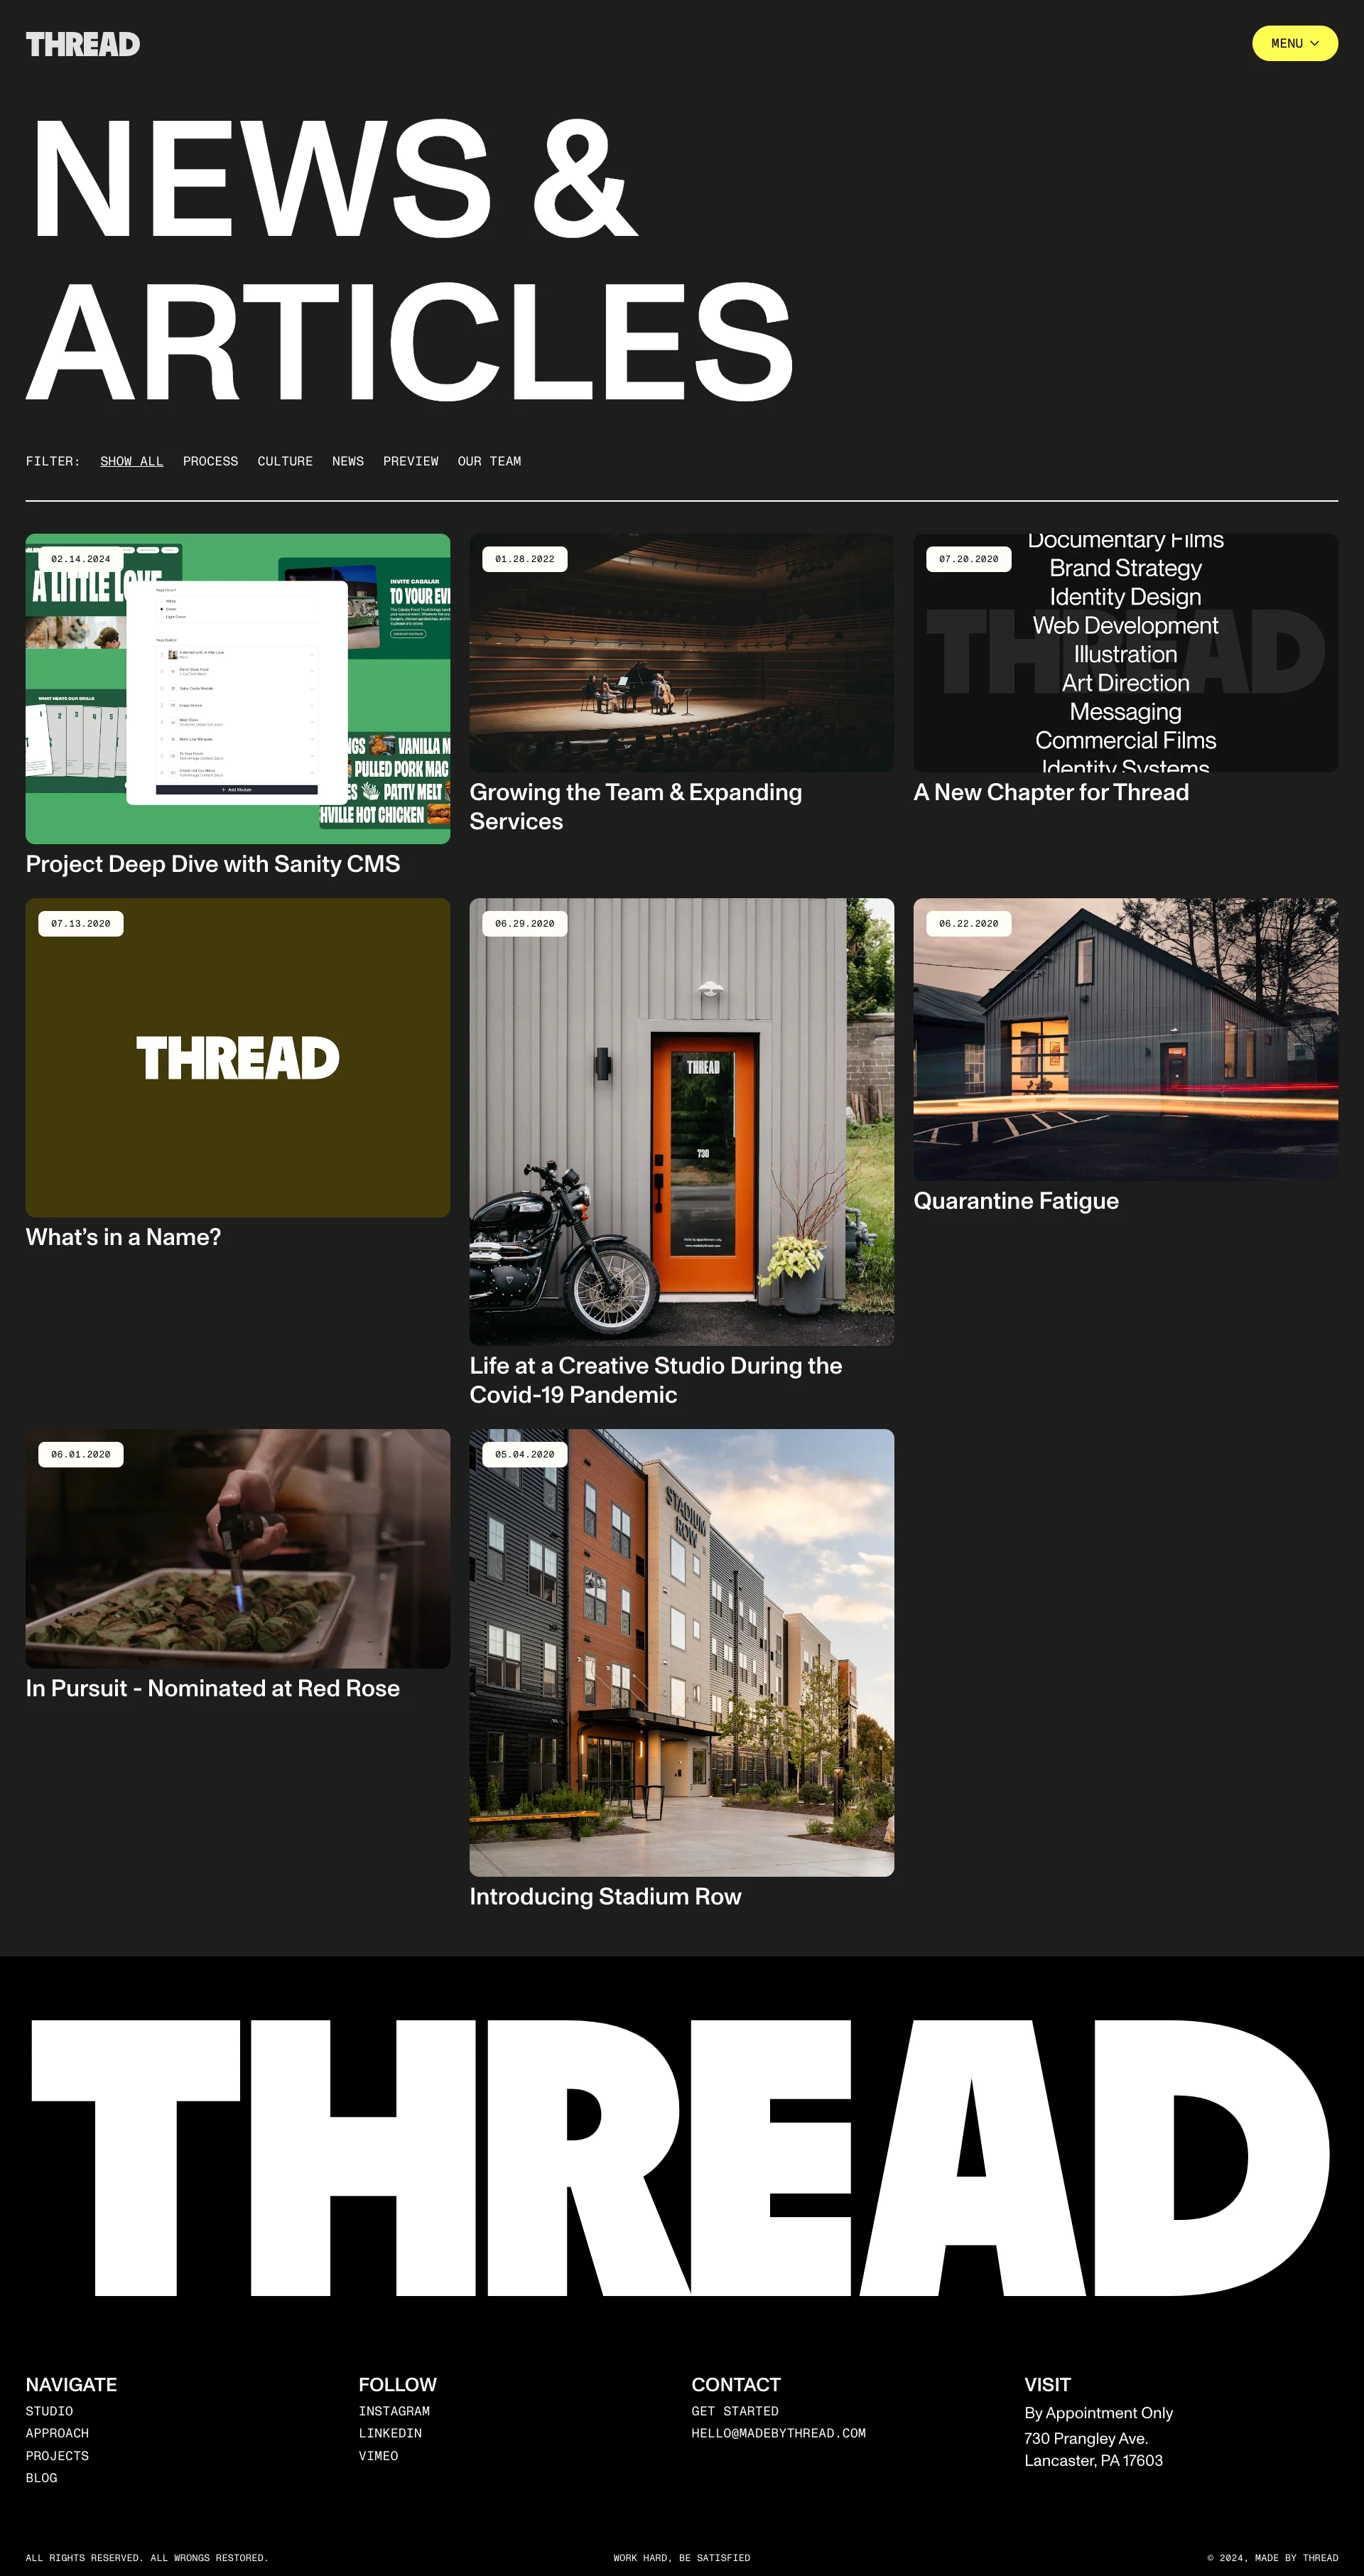 Thread Landing Page Example: Elevate your brand with Thread, a full service creative studio crafting meaningful stories through strategy, design, film, photo, and digital experiences.